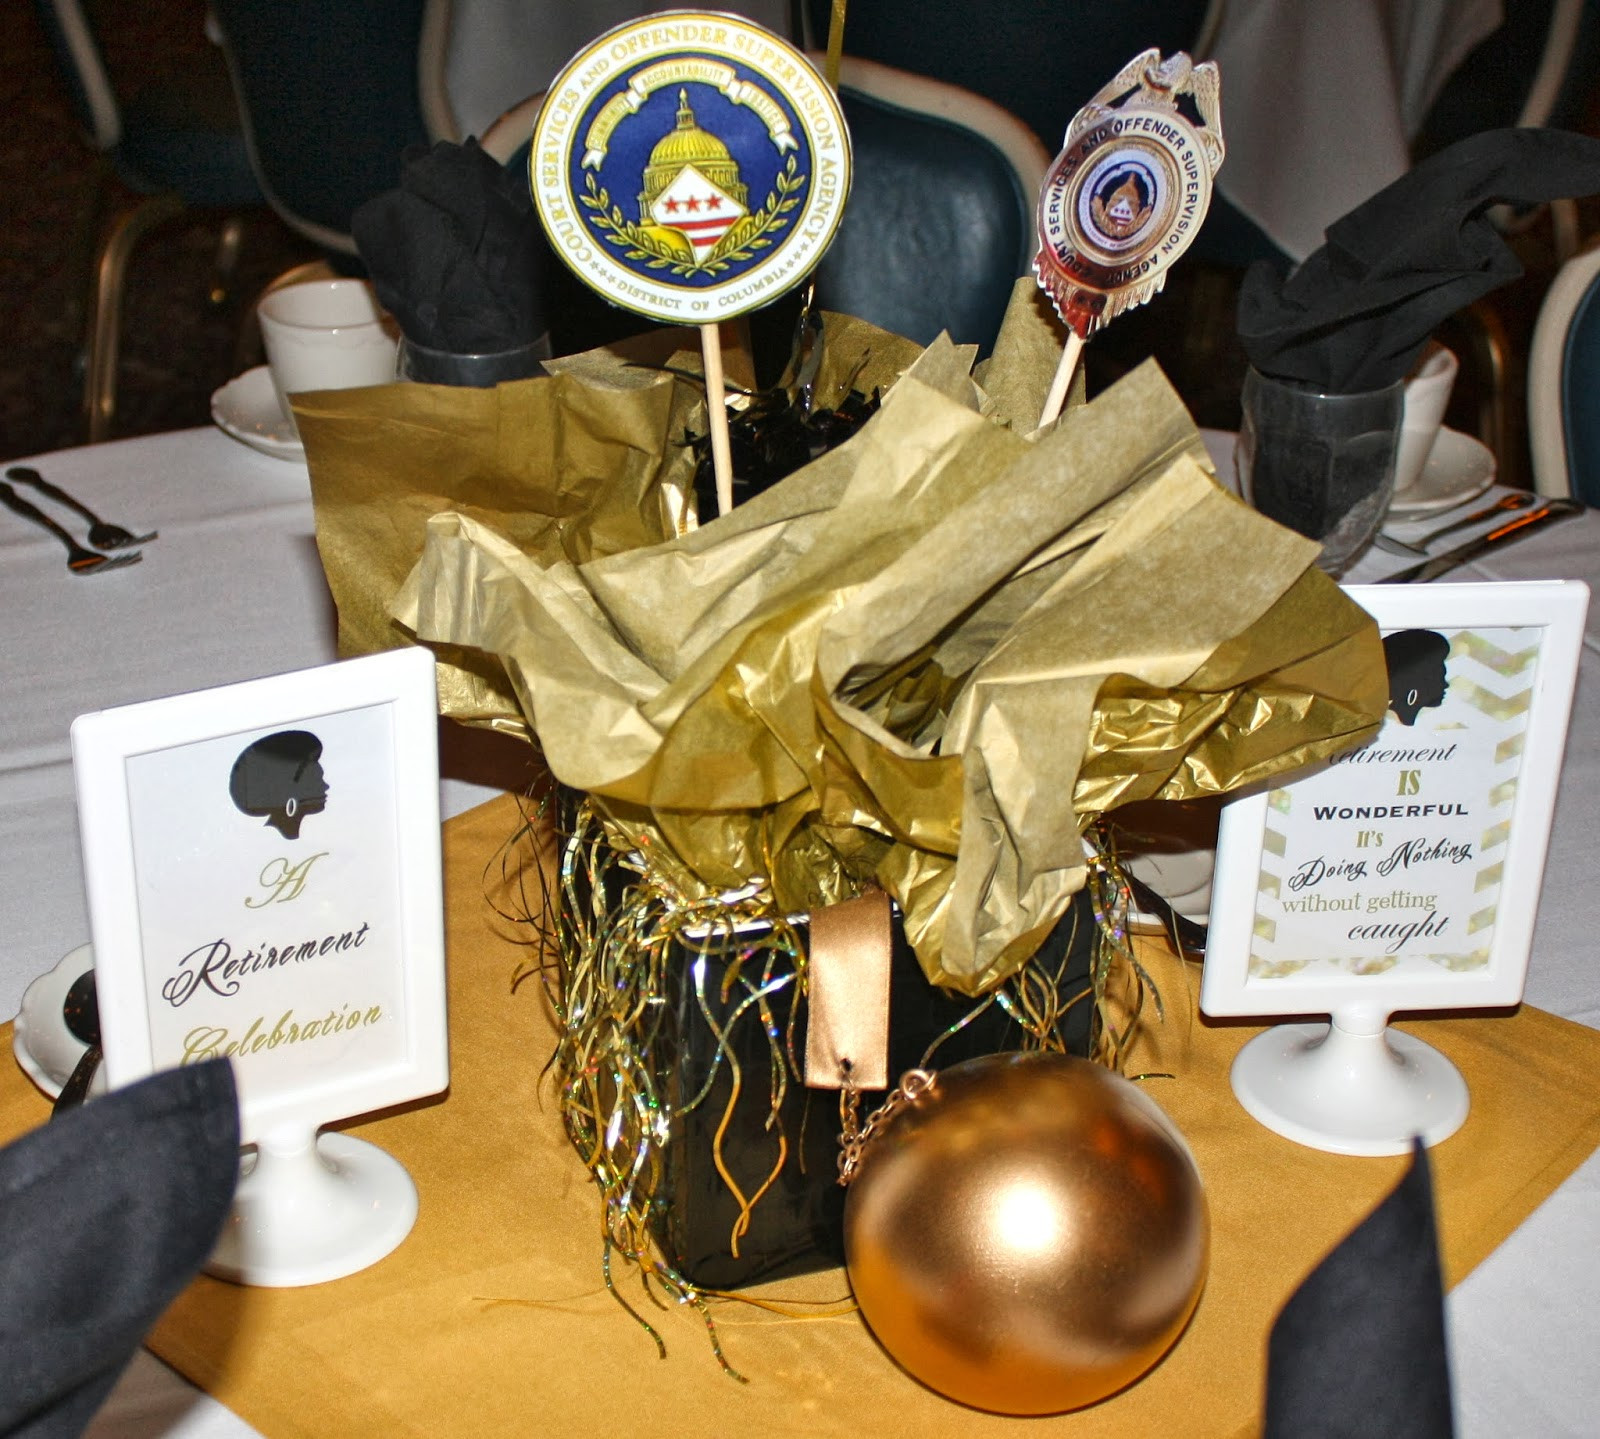 Retirement Party Centerpieces Ideas
 Enchanted Expectations You ve Been Paroled Law